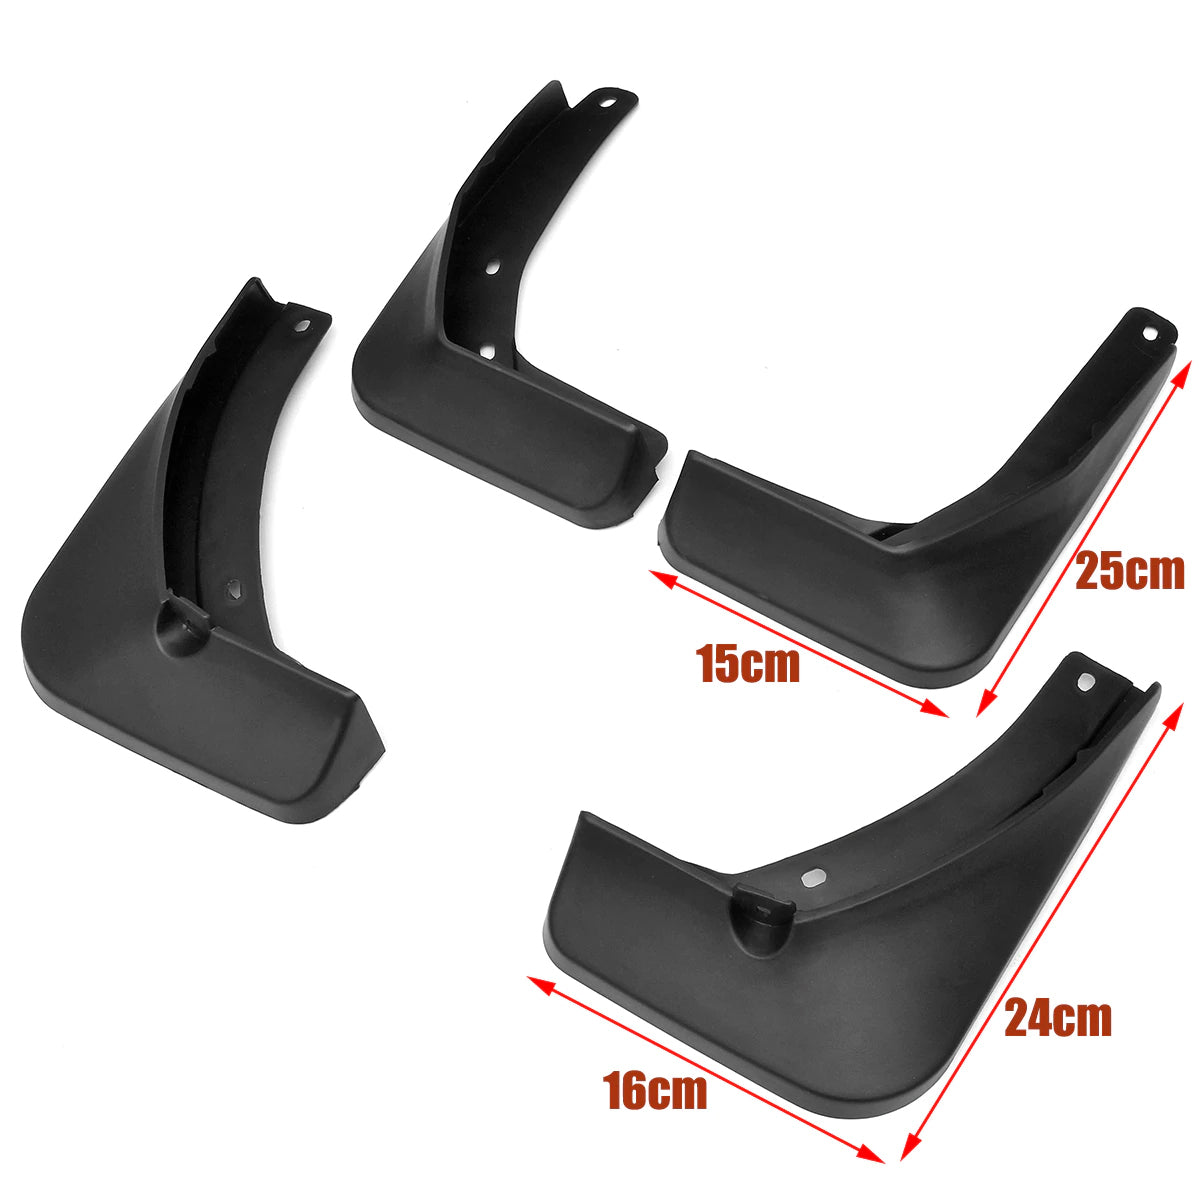 Oshotto Mud Flap (O.E.M Type) For Ford Freestyle (Set of 4)